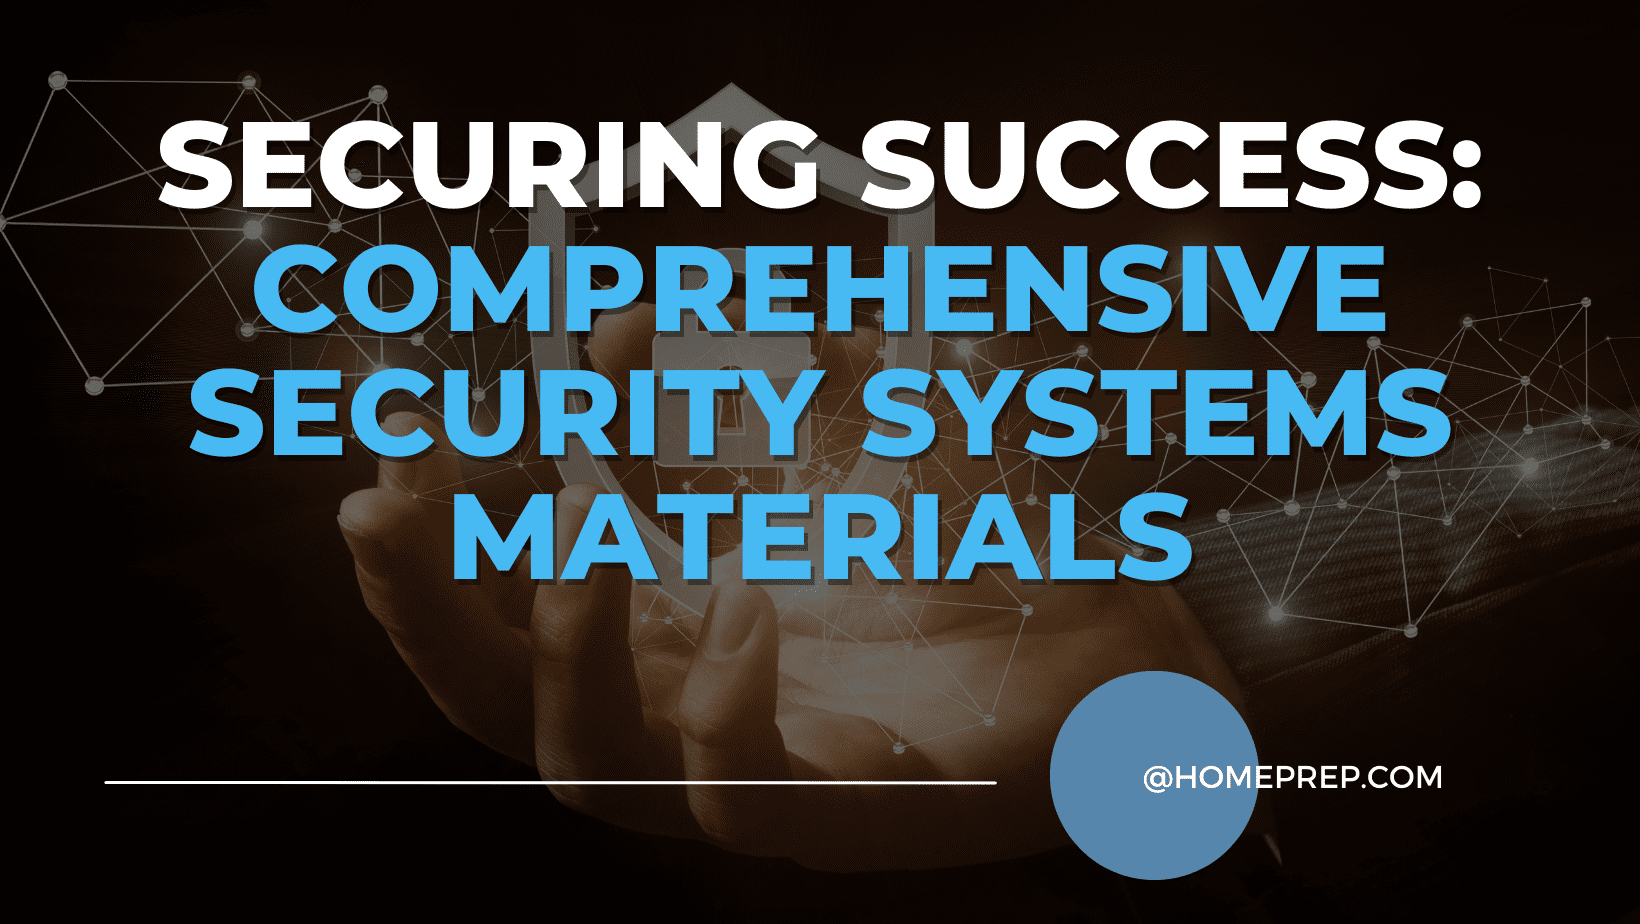 Unlock Success in Security Systems with @HomePrep’s Comprehensive Resources